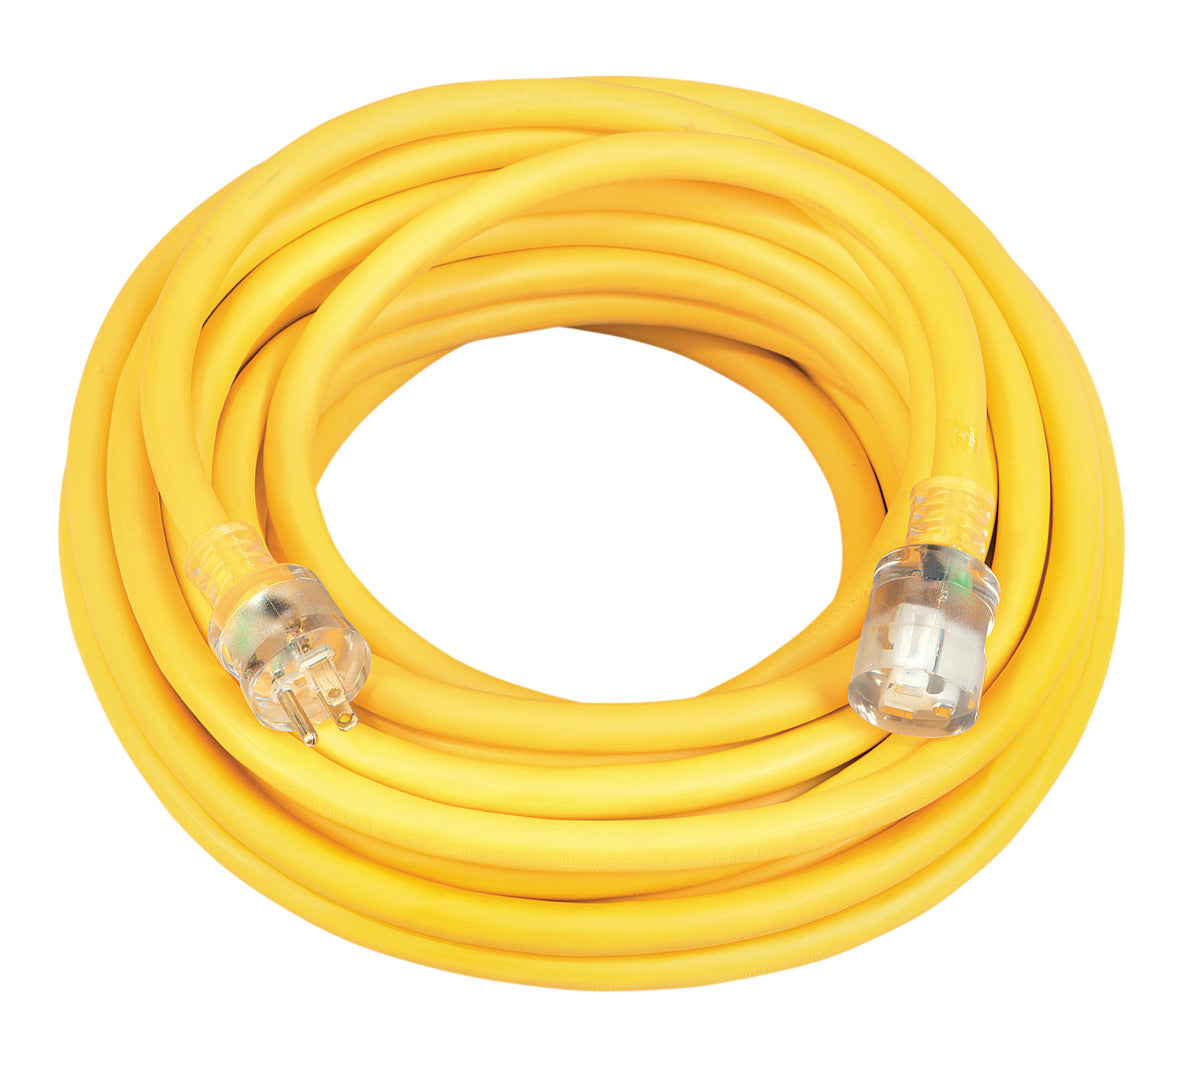 Southwire 10/3 Extra Heavy-Duty 15-Amp SJTW High Visibility General Purpose Extension Cord with Lighted End